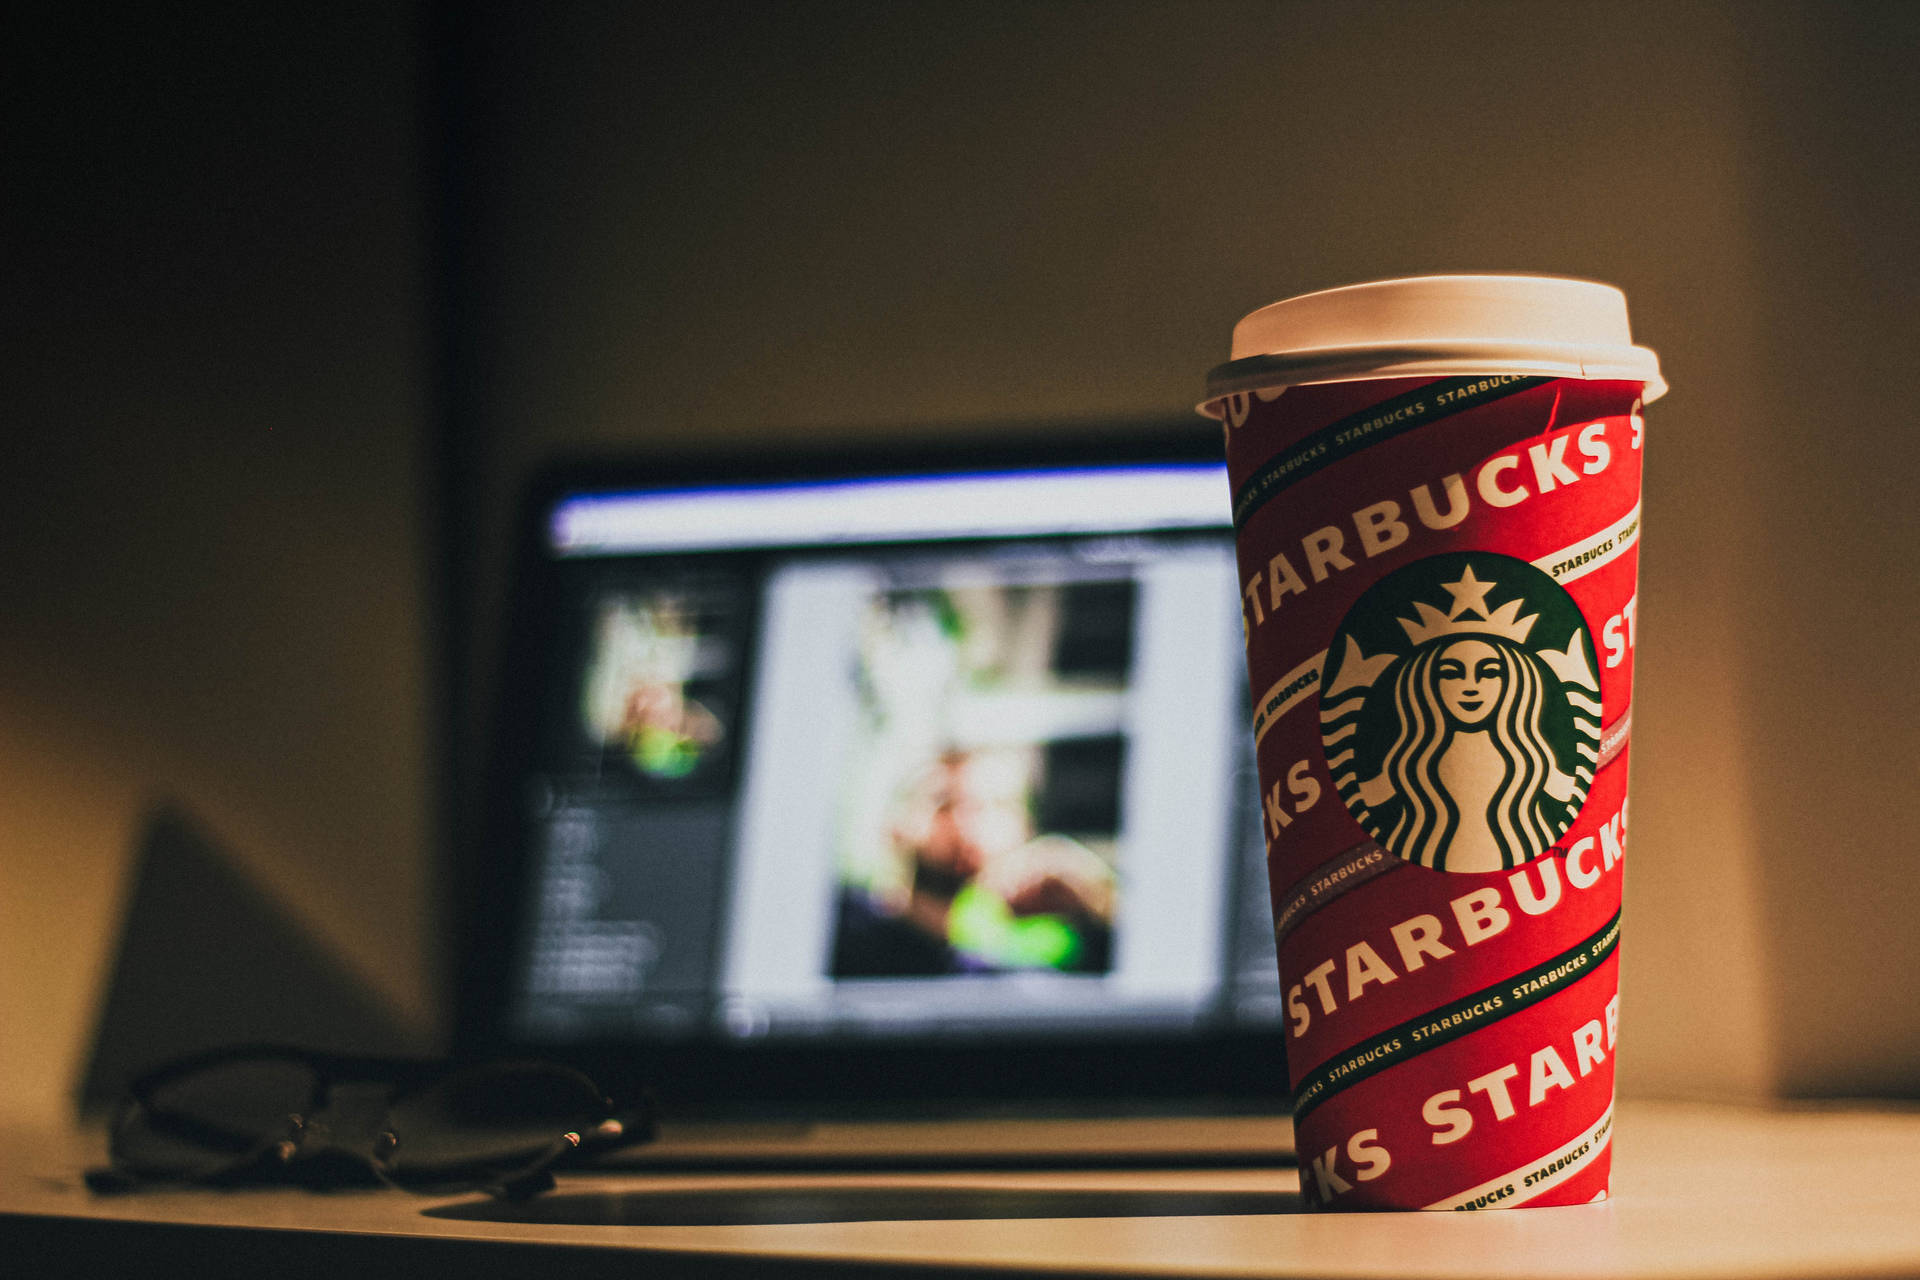 Editing Software And Starbucks Cup Wallpaper